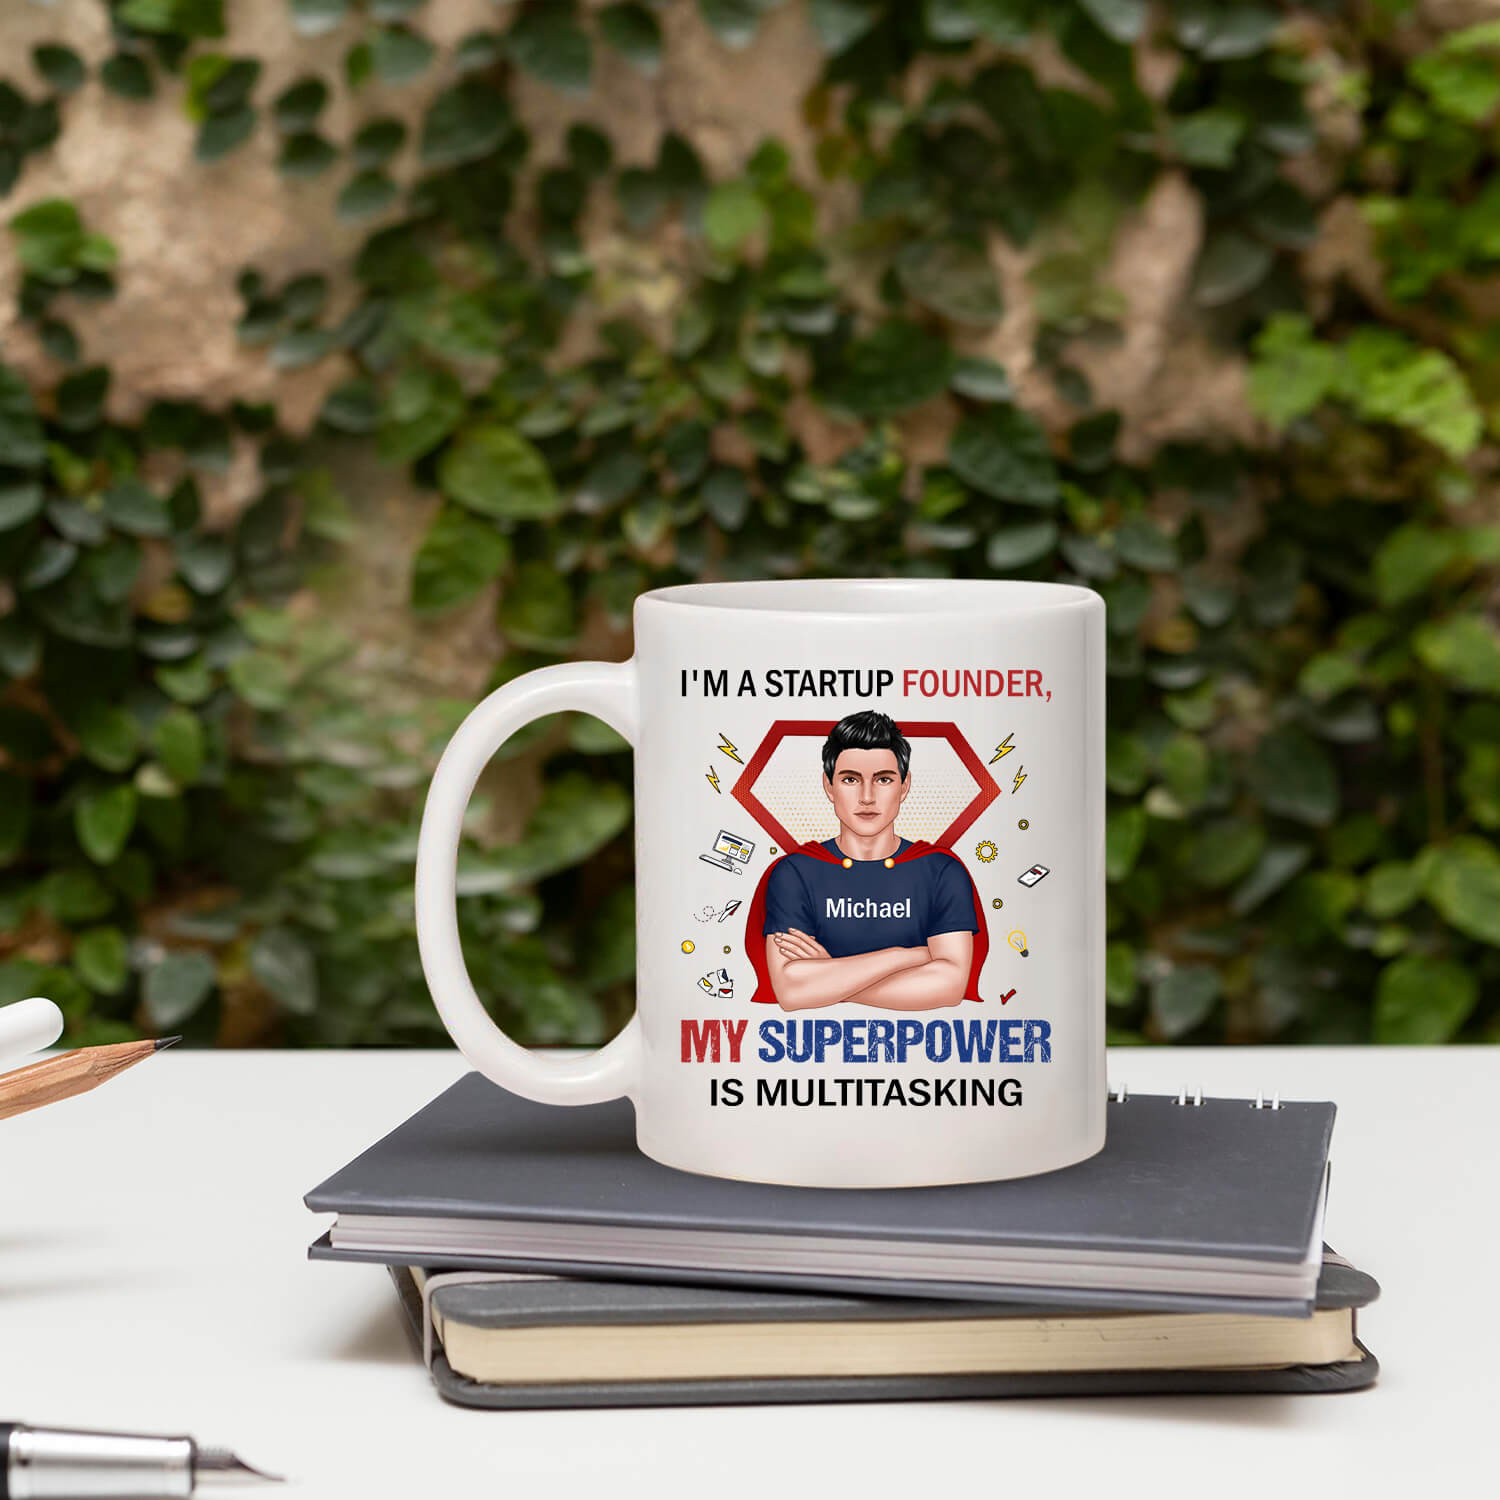 I'm a startup founder, my superpower is multitasking - Personalized Birthday gift for Startup Founder - Custom Mug - MyMindfulGifts